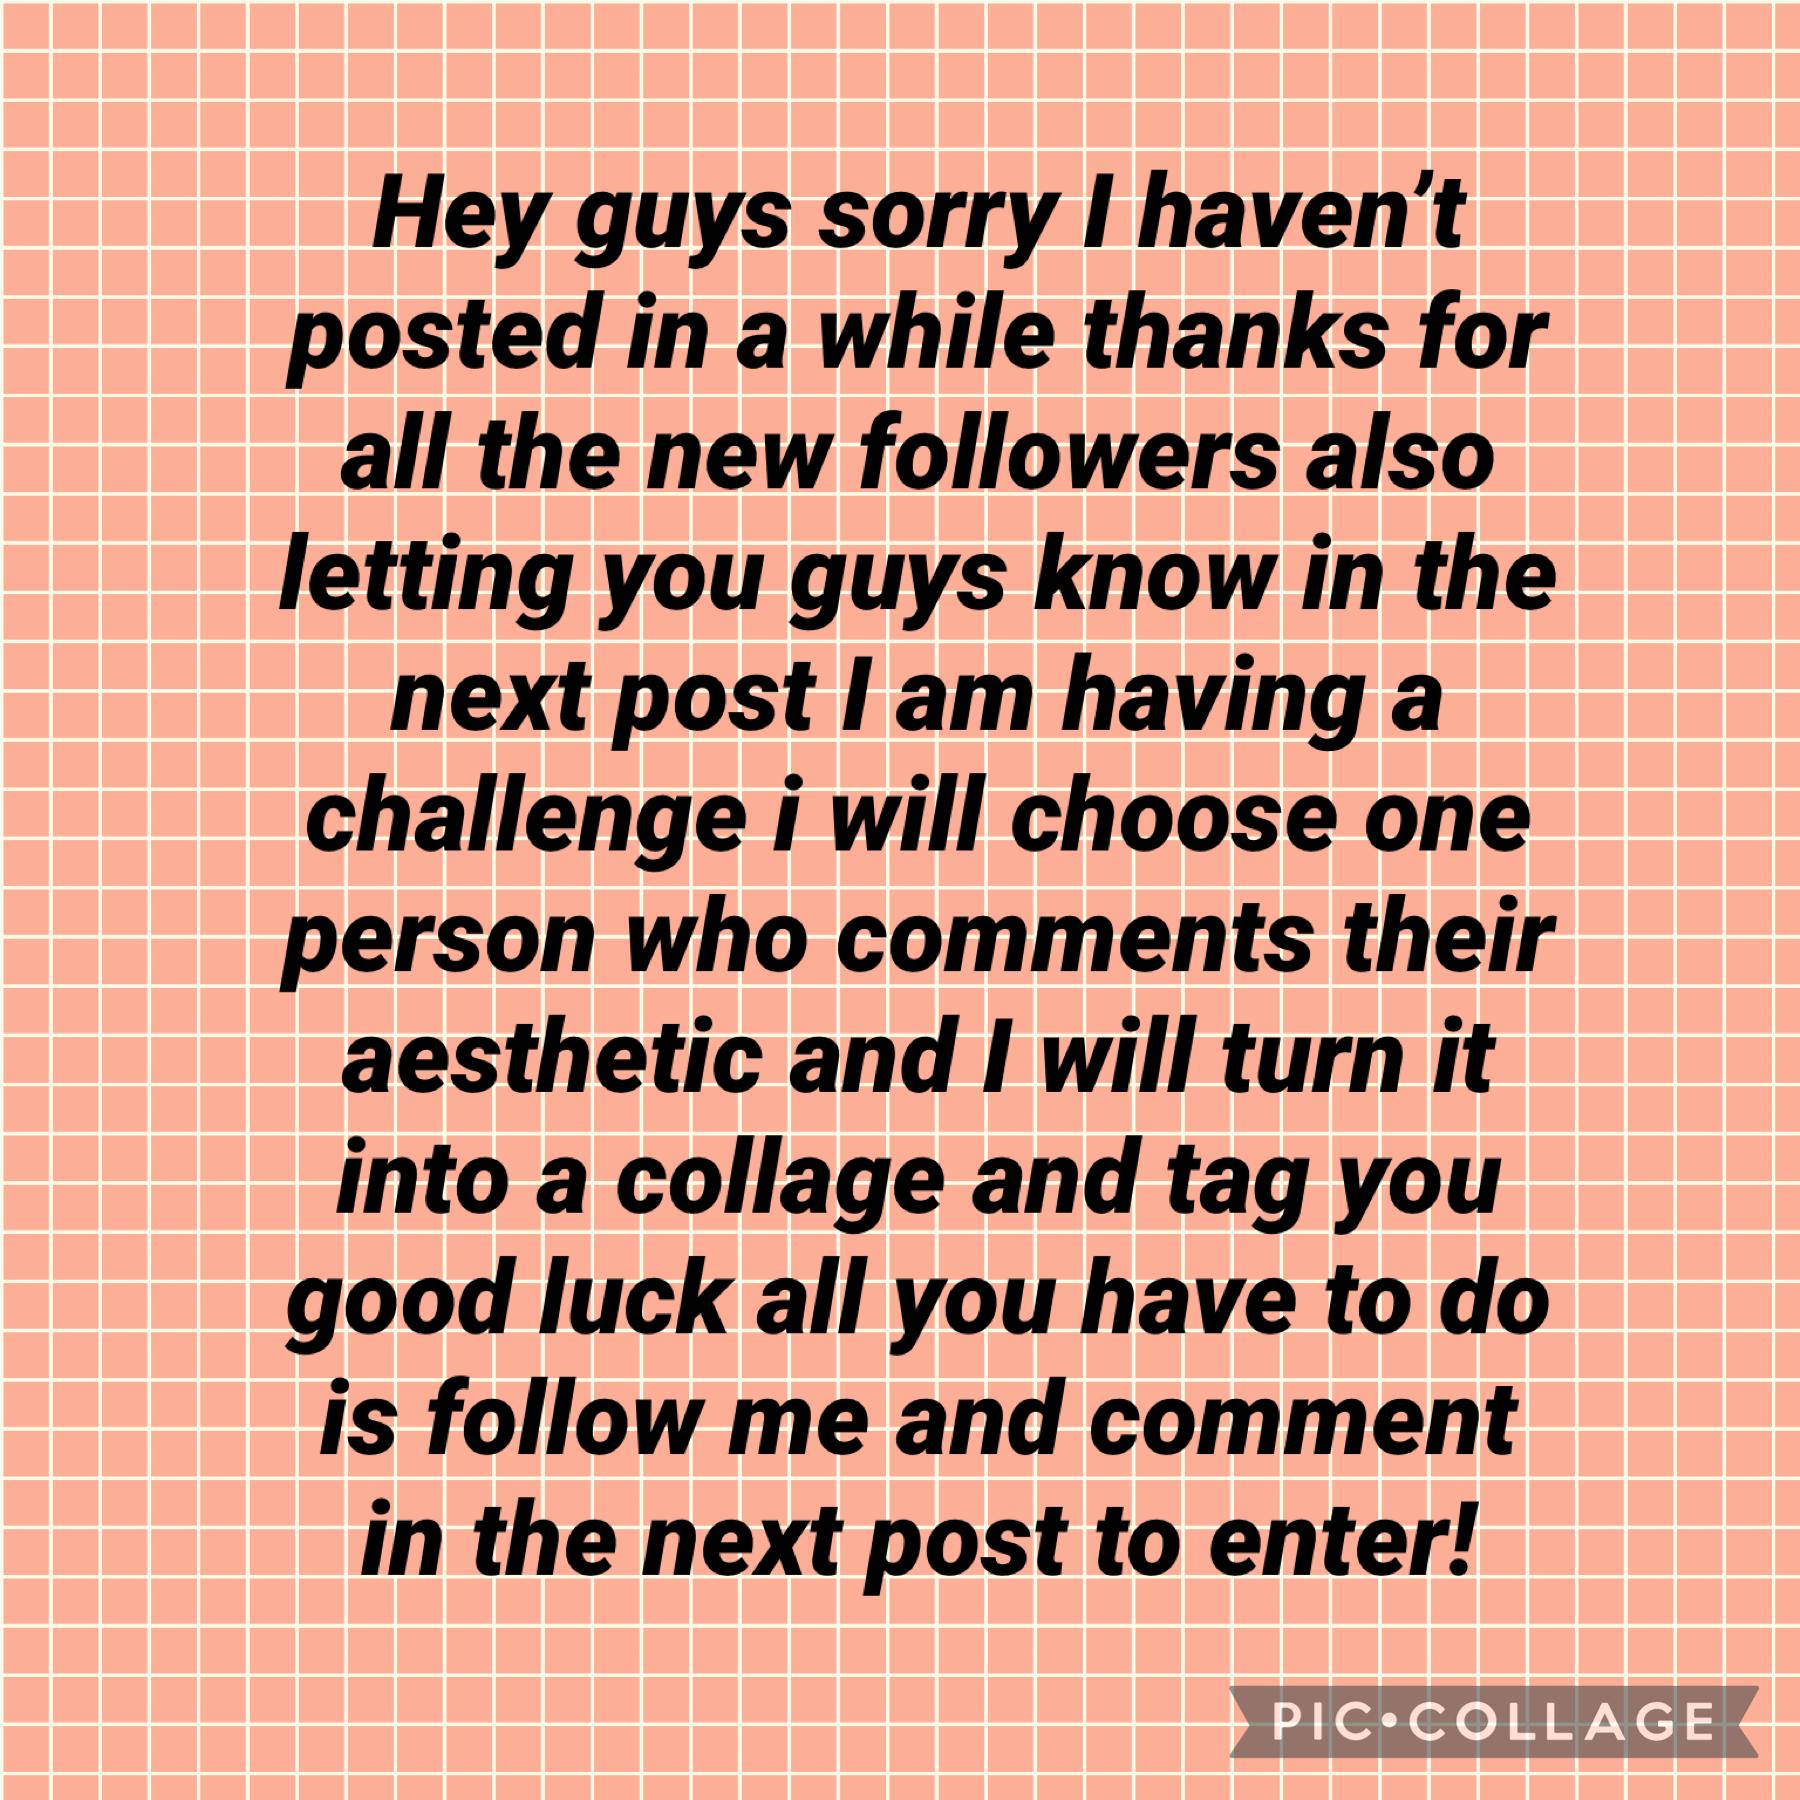 Good luck comment on my upcoming post guys!!,